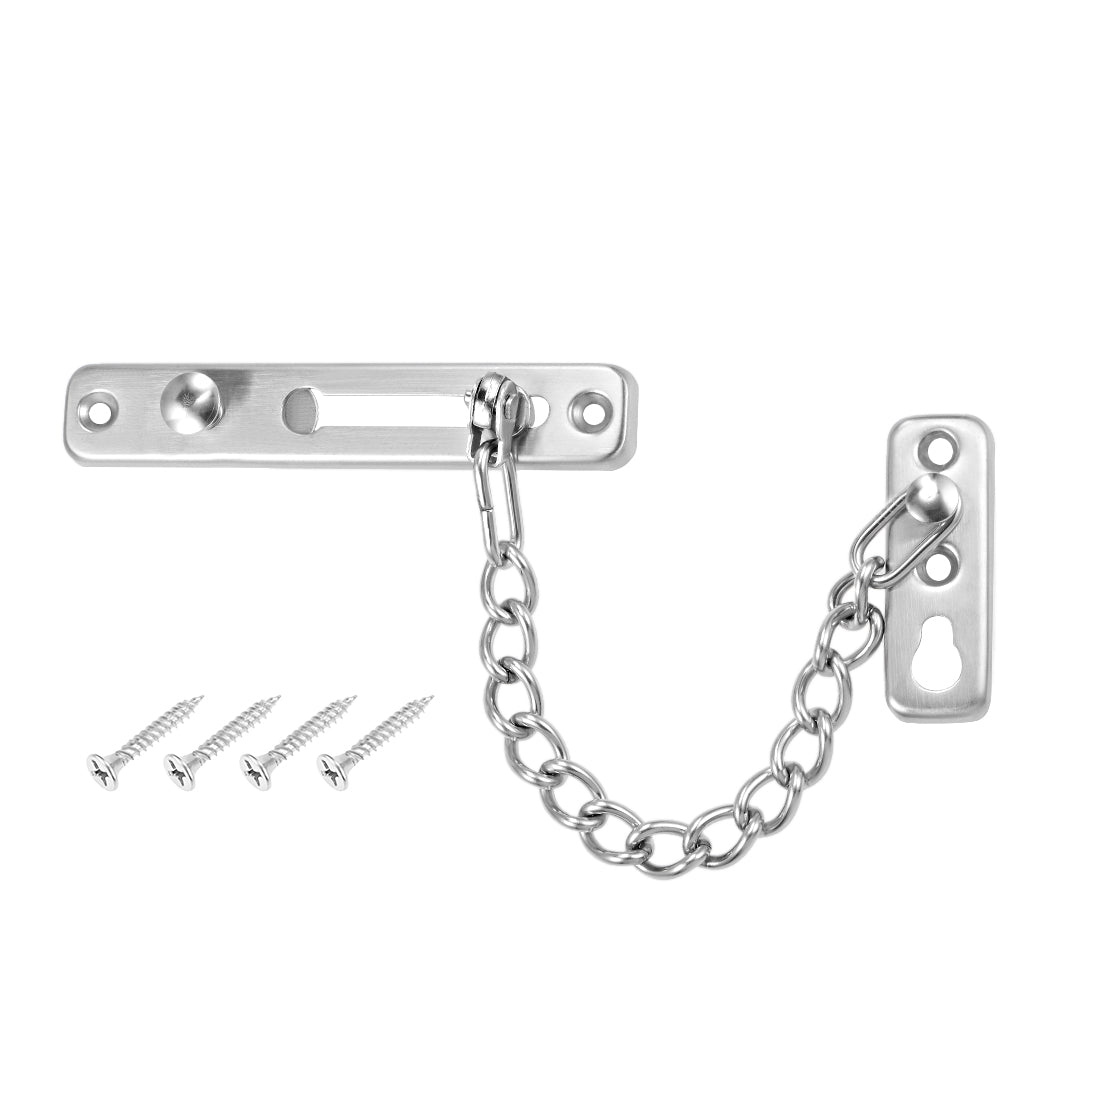 uxcell Uxcell Chain Door Guard Lock Security Safety Latch Lock with Spring Anti-Theft Press Lock Silver 2pcs